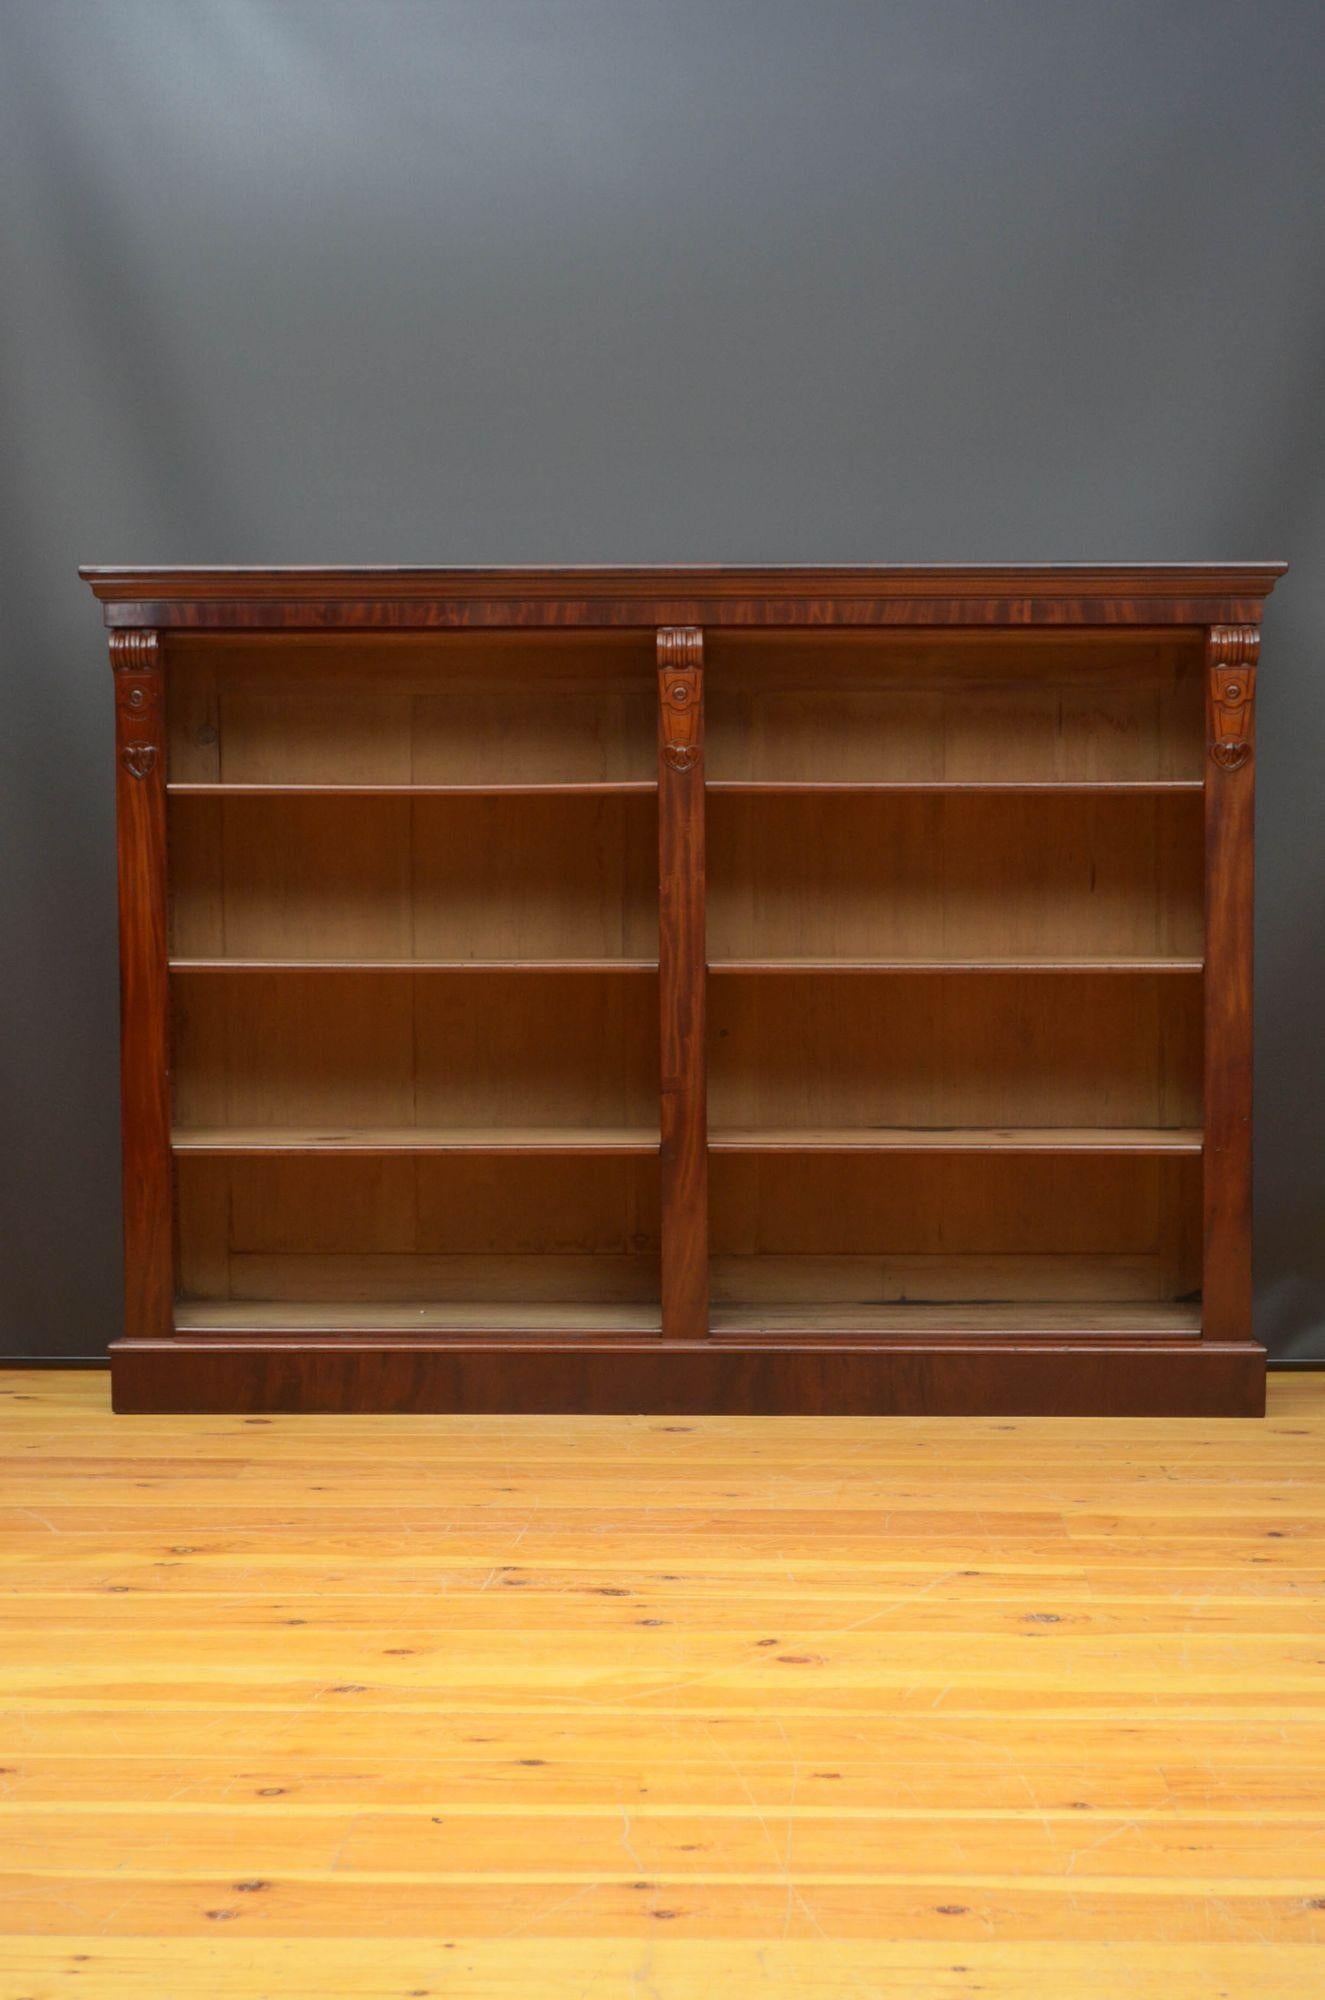 Sn5377 Fine quality large Victorian mahogany bookcase, having figured mahogany top above shallow frieze and two open sections with height adjustable shelves, all flanked by fine quality drop carvings, standing on moulded plinth base. This antique